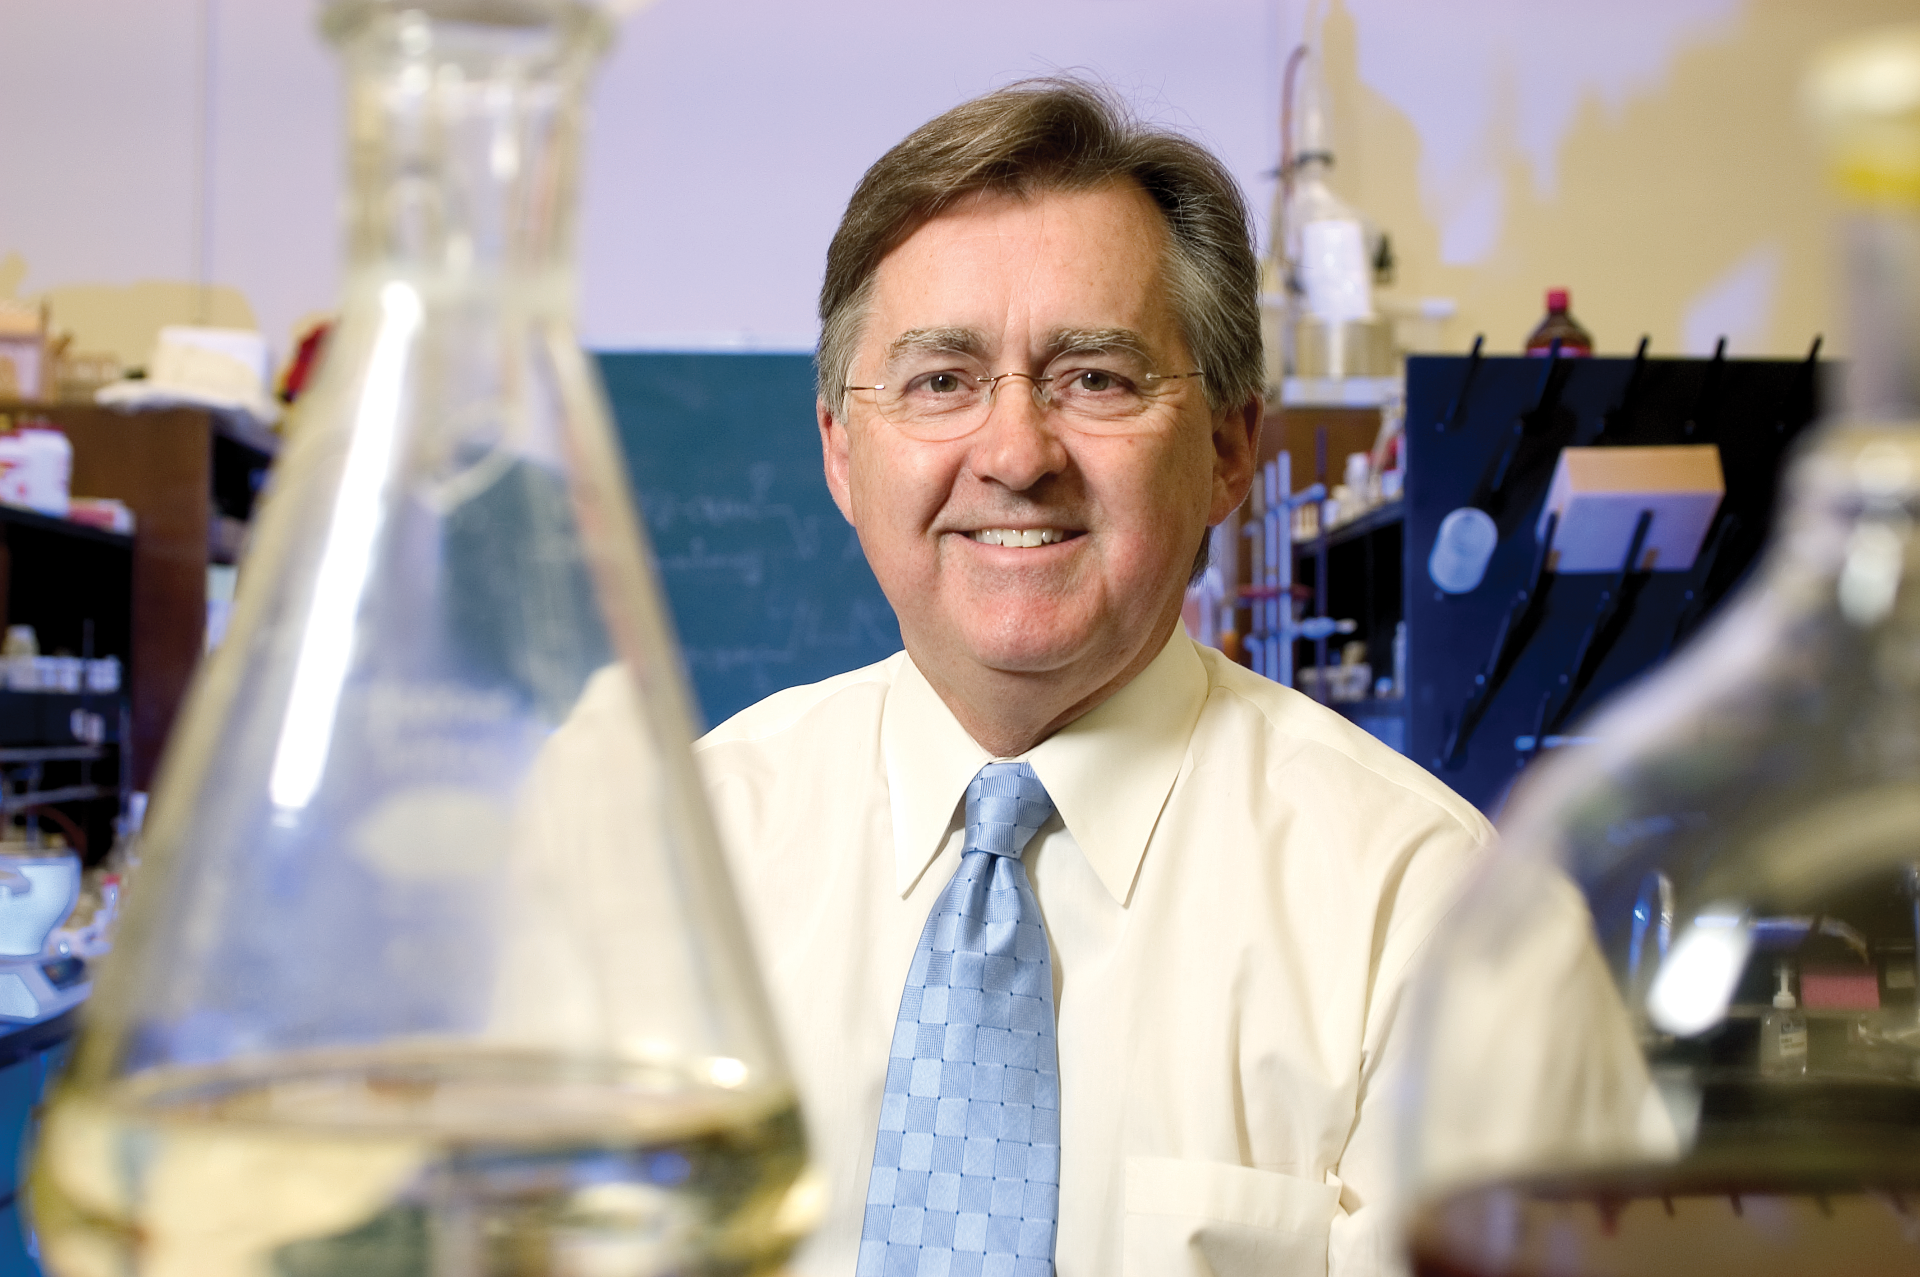 Dr. Sherry in his UT Dallas lab in 2005.